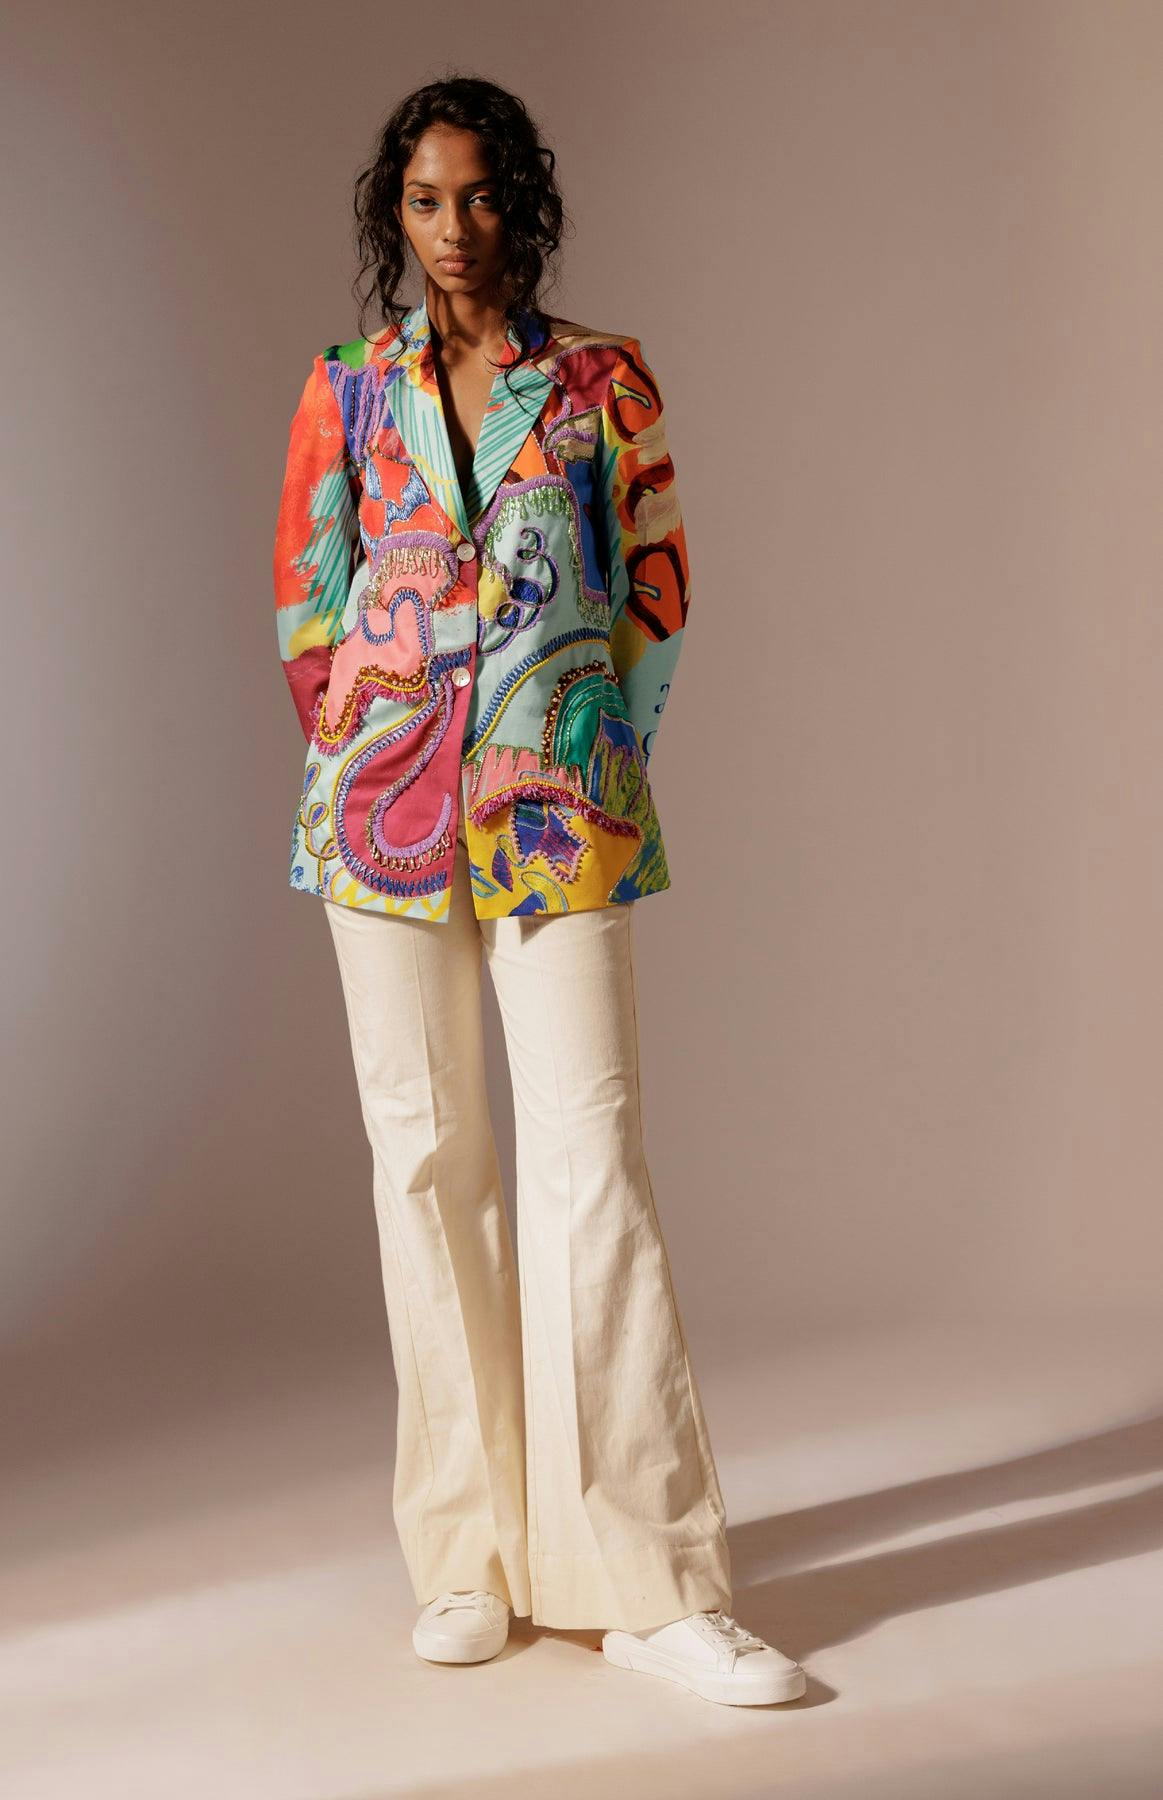 Island Embroidered Blazer, a product by Advait India